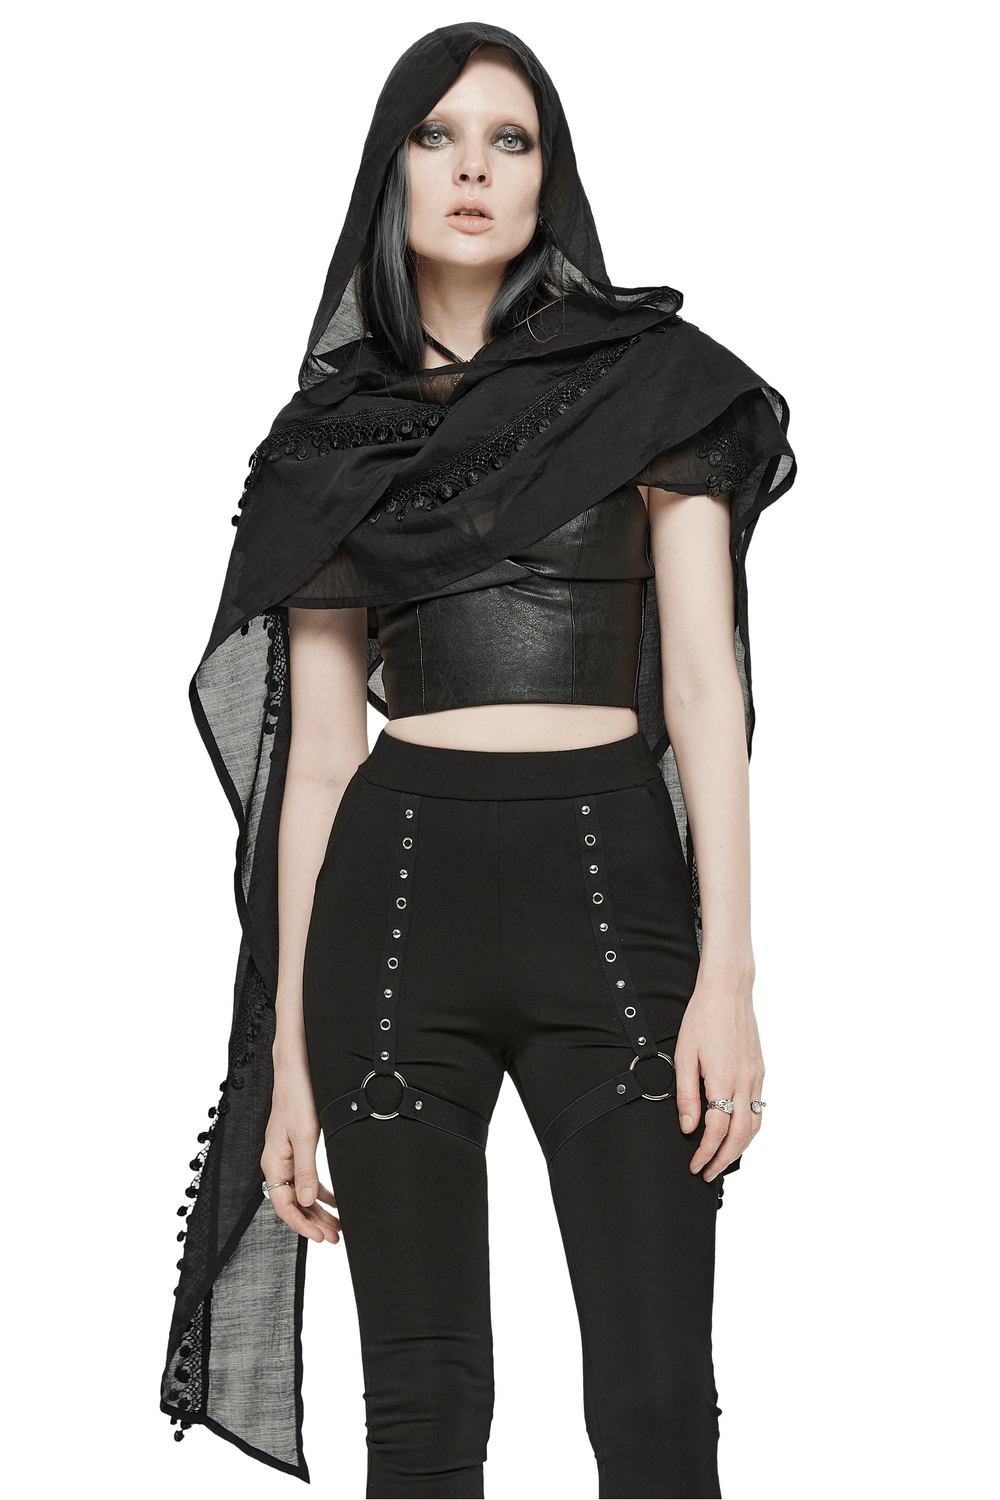 Elegant Black Hooded Lace Scarf Cape for Women